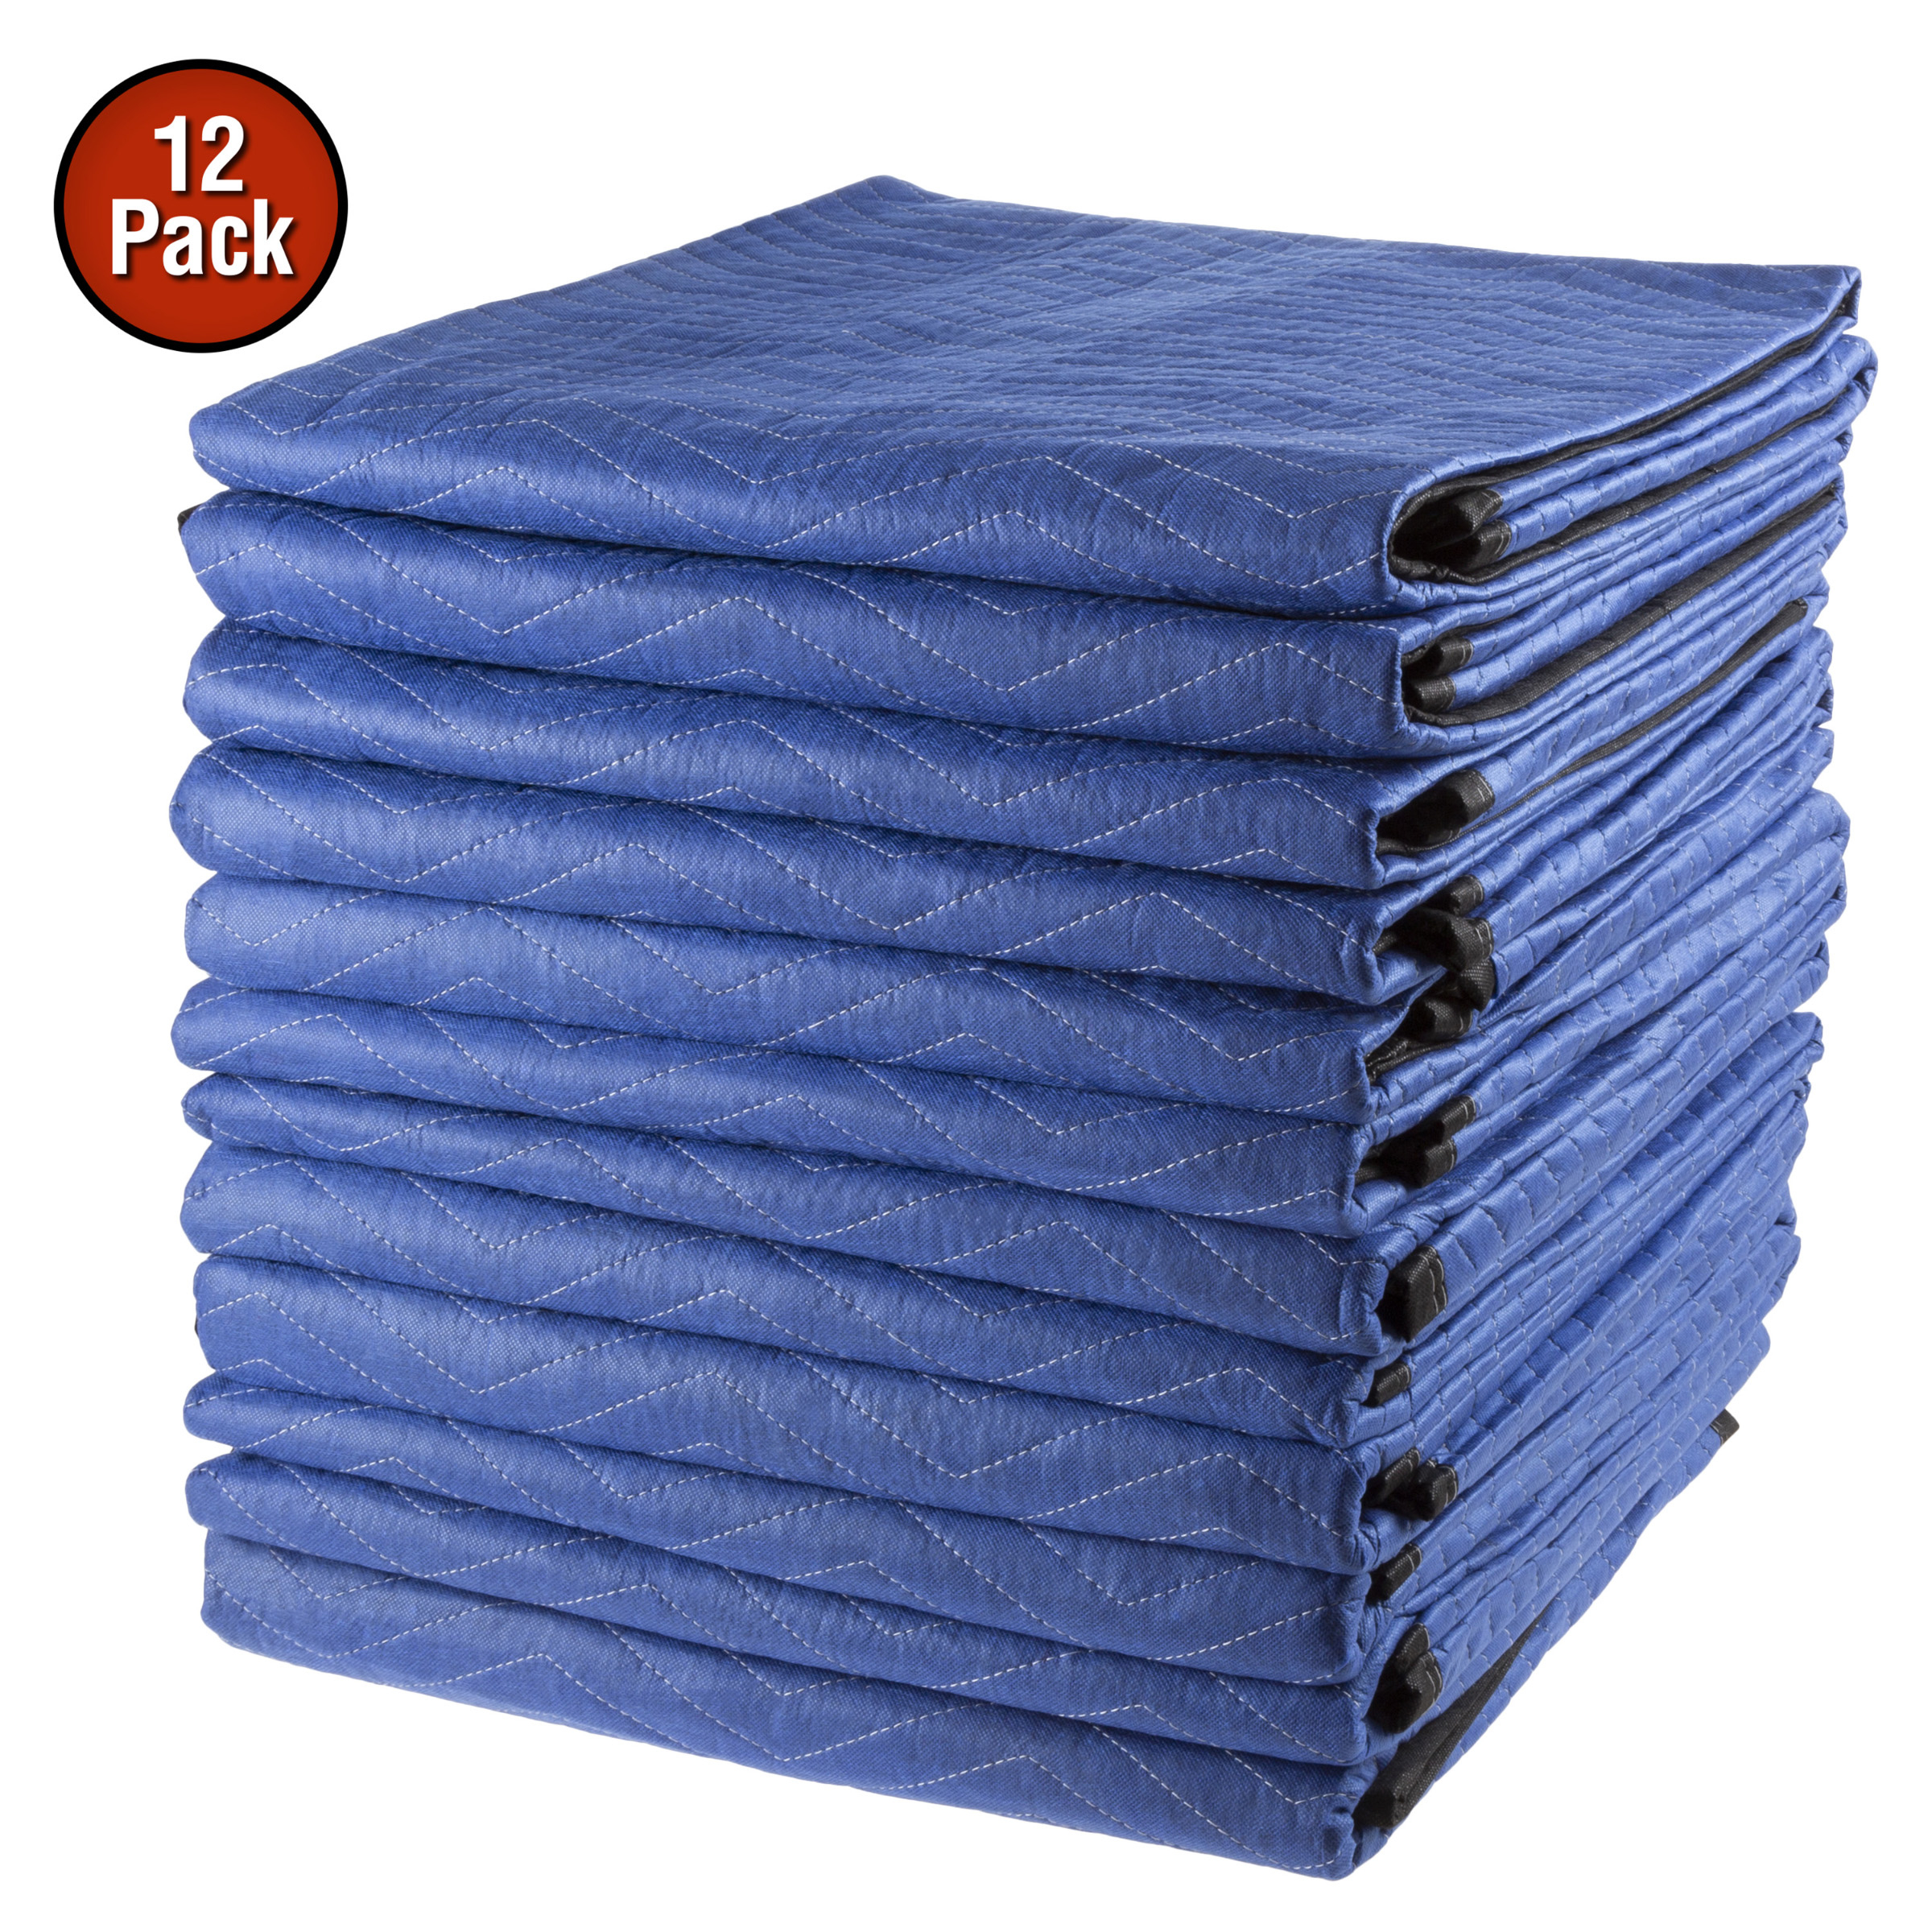 12 Dual Sided Moving Storage Blankets 40 Lb/dz Quilted Padded Protection 1 Dozen 80 X 72 Inch